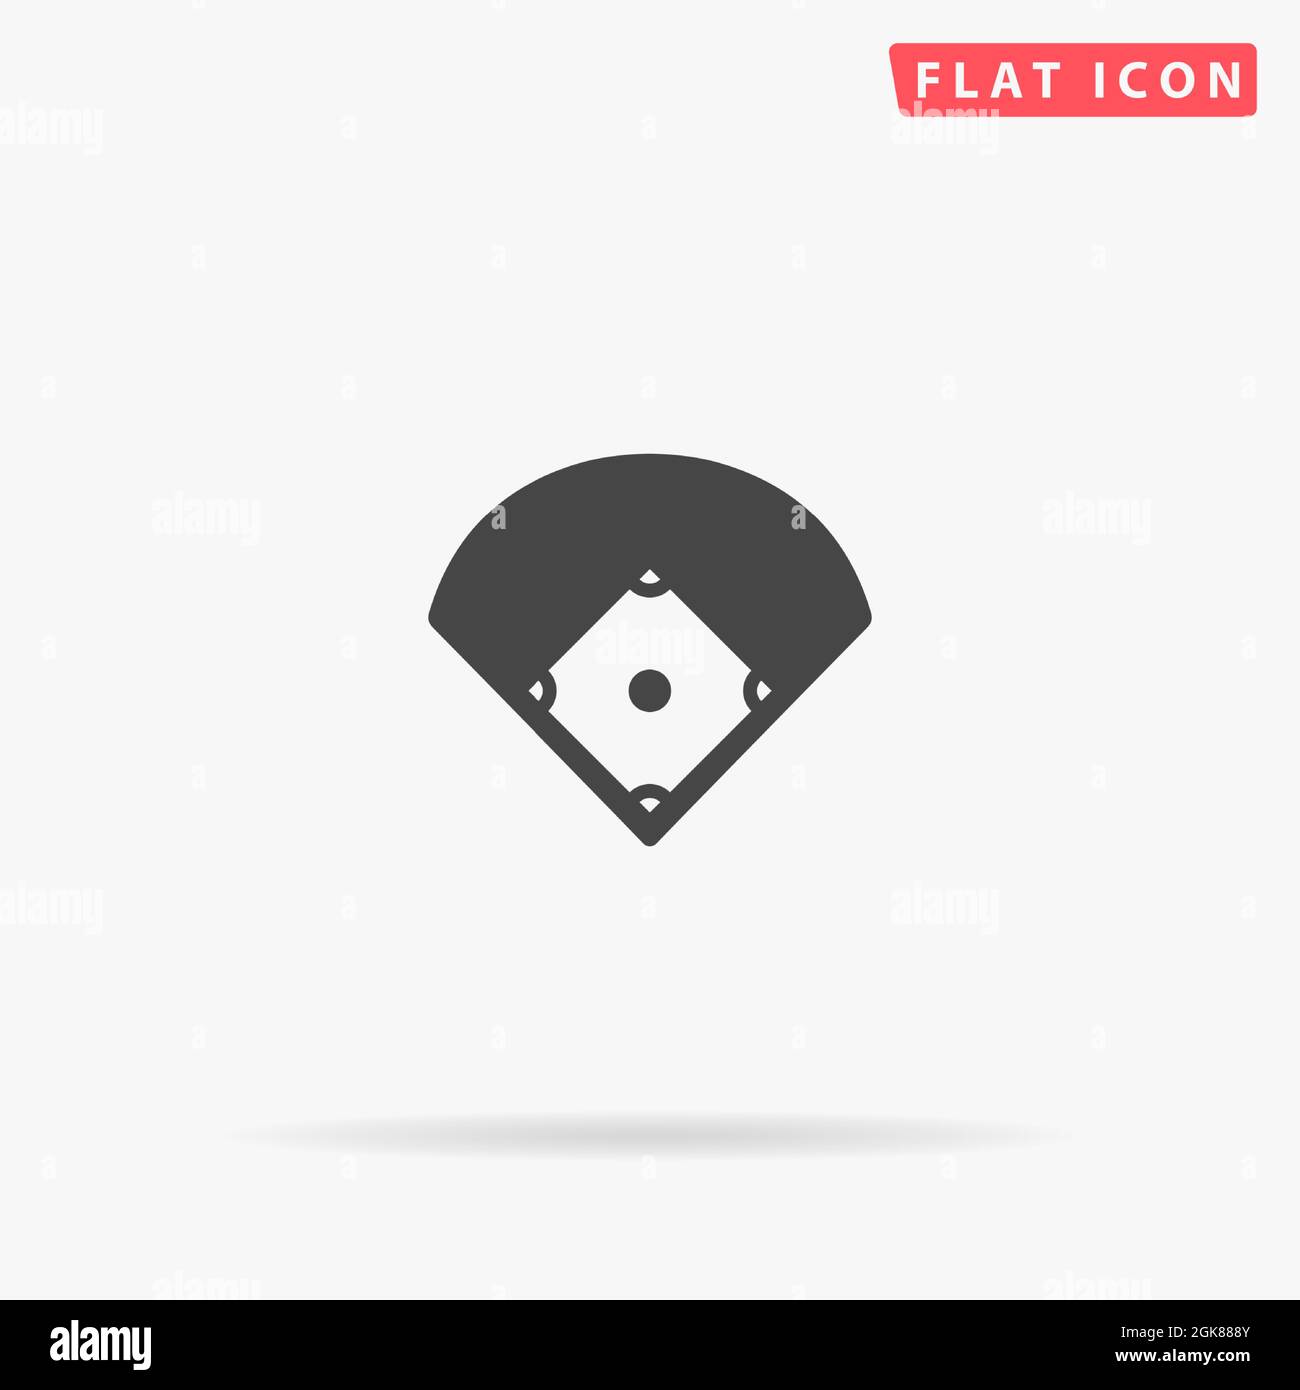 Baseball Catcher Torso Icon - Download in Colored Outline Style